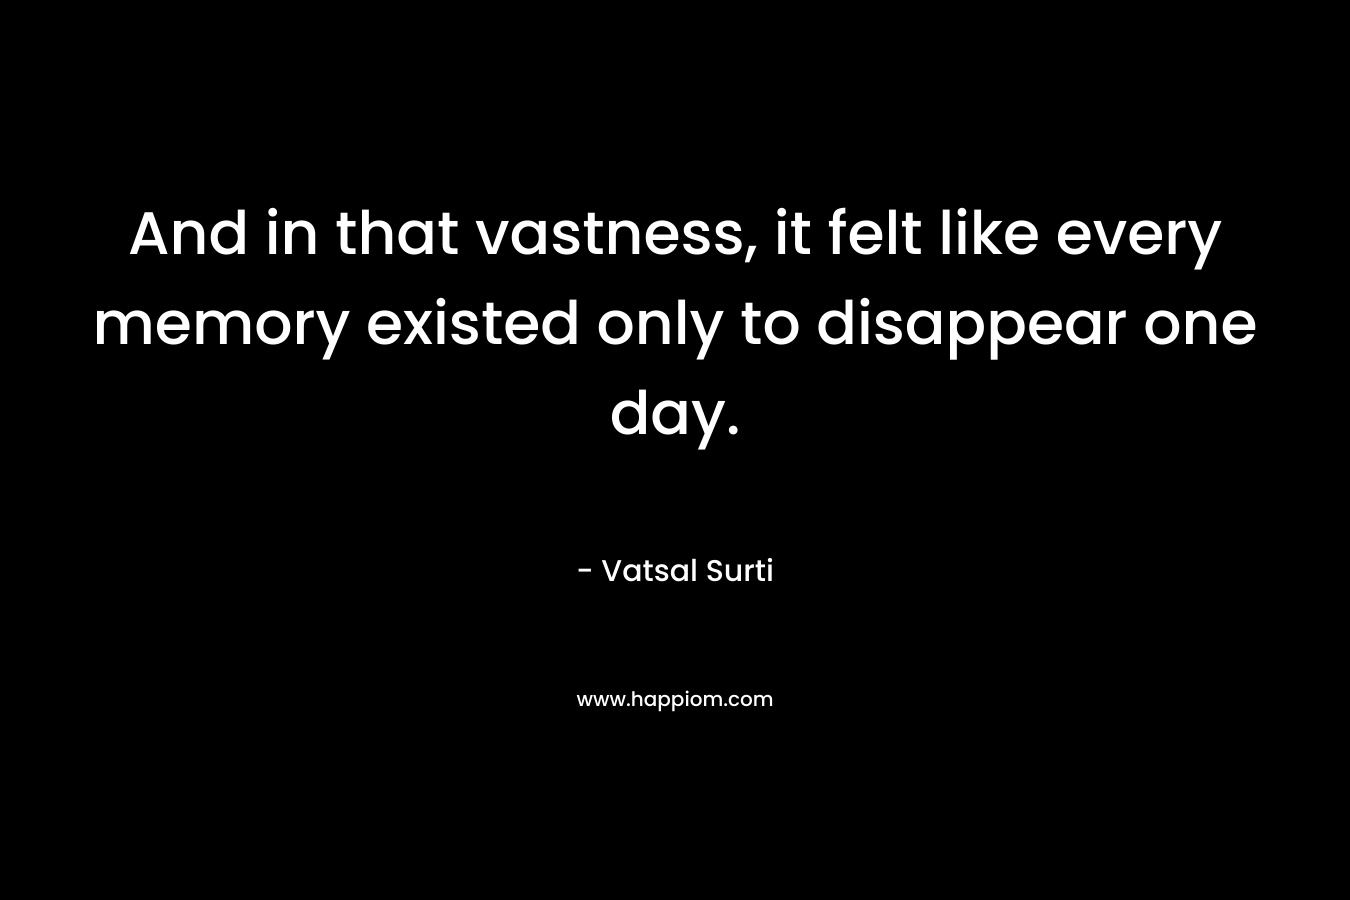 And in that vastness, it felt like every memory existed only to disappear one day.